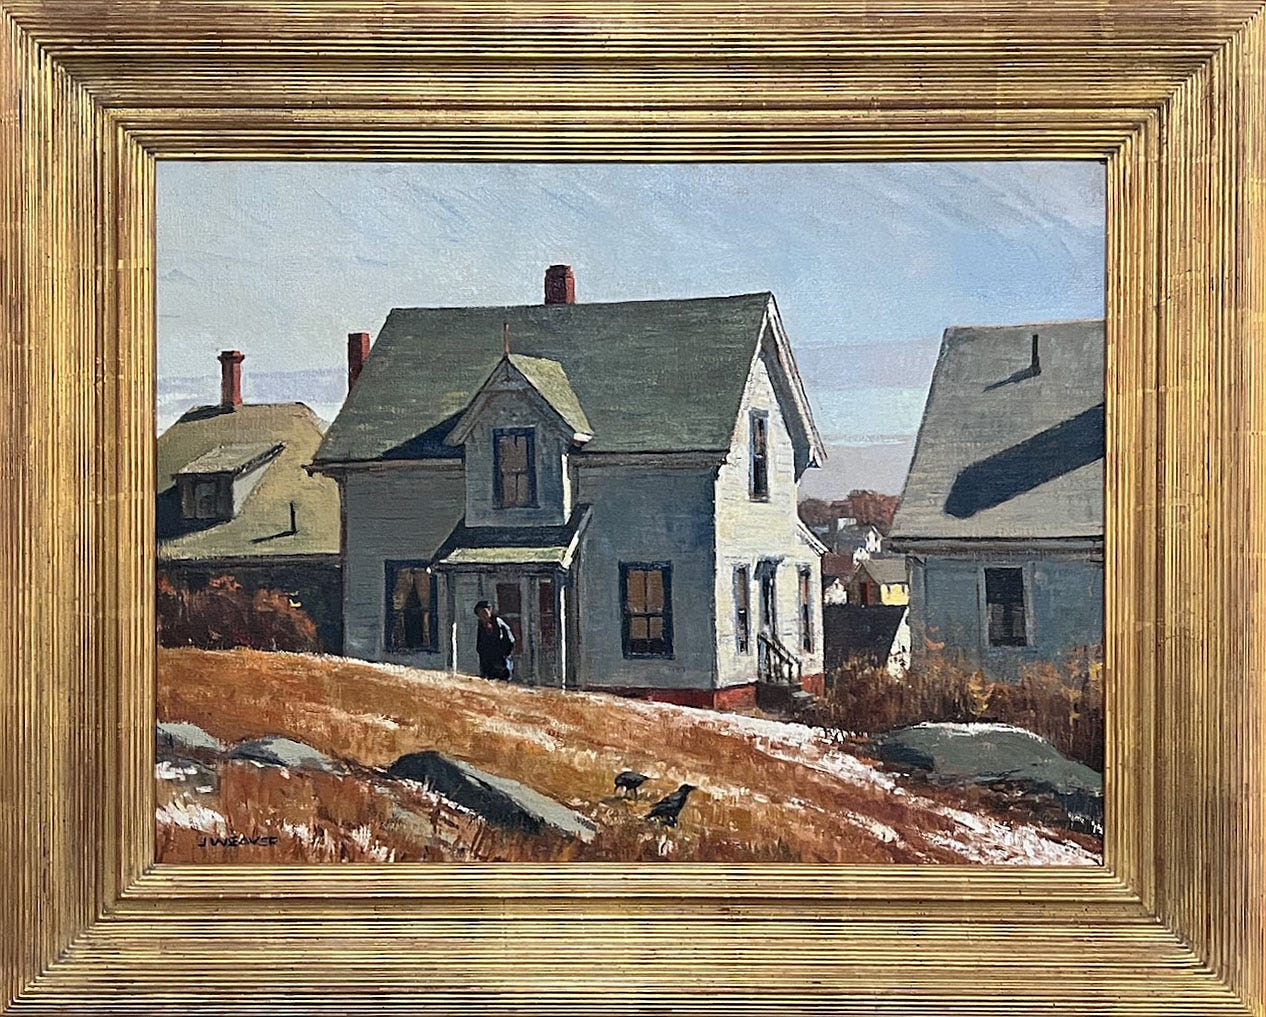 A painting of a house

Description automatically generated with low confidence